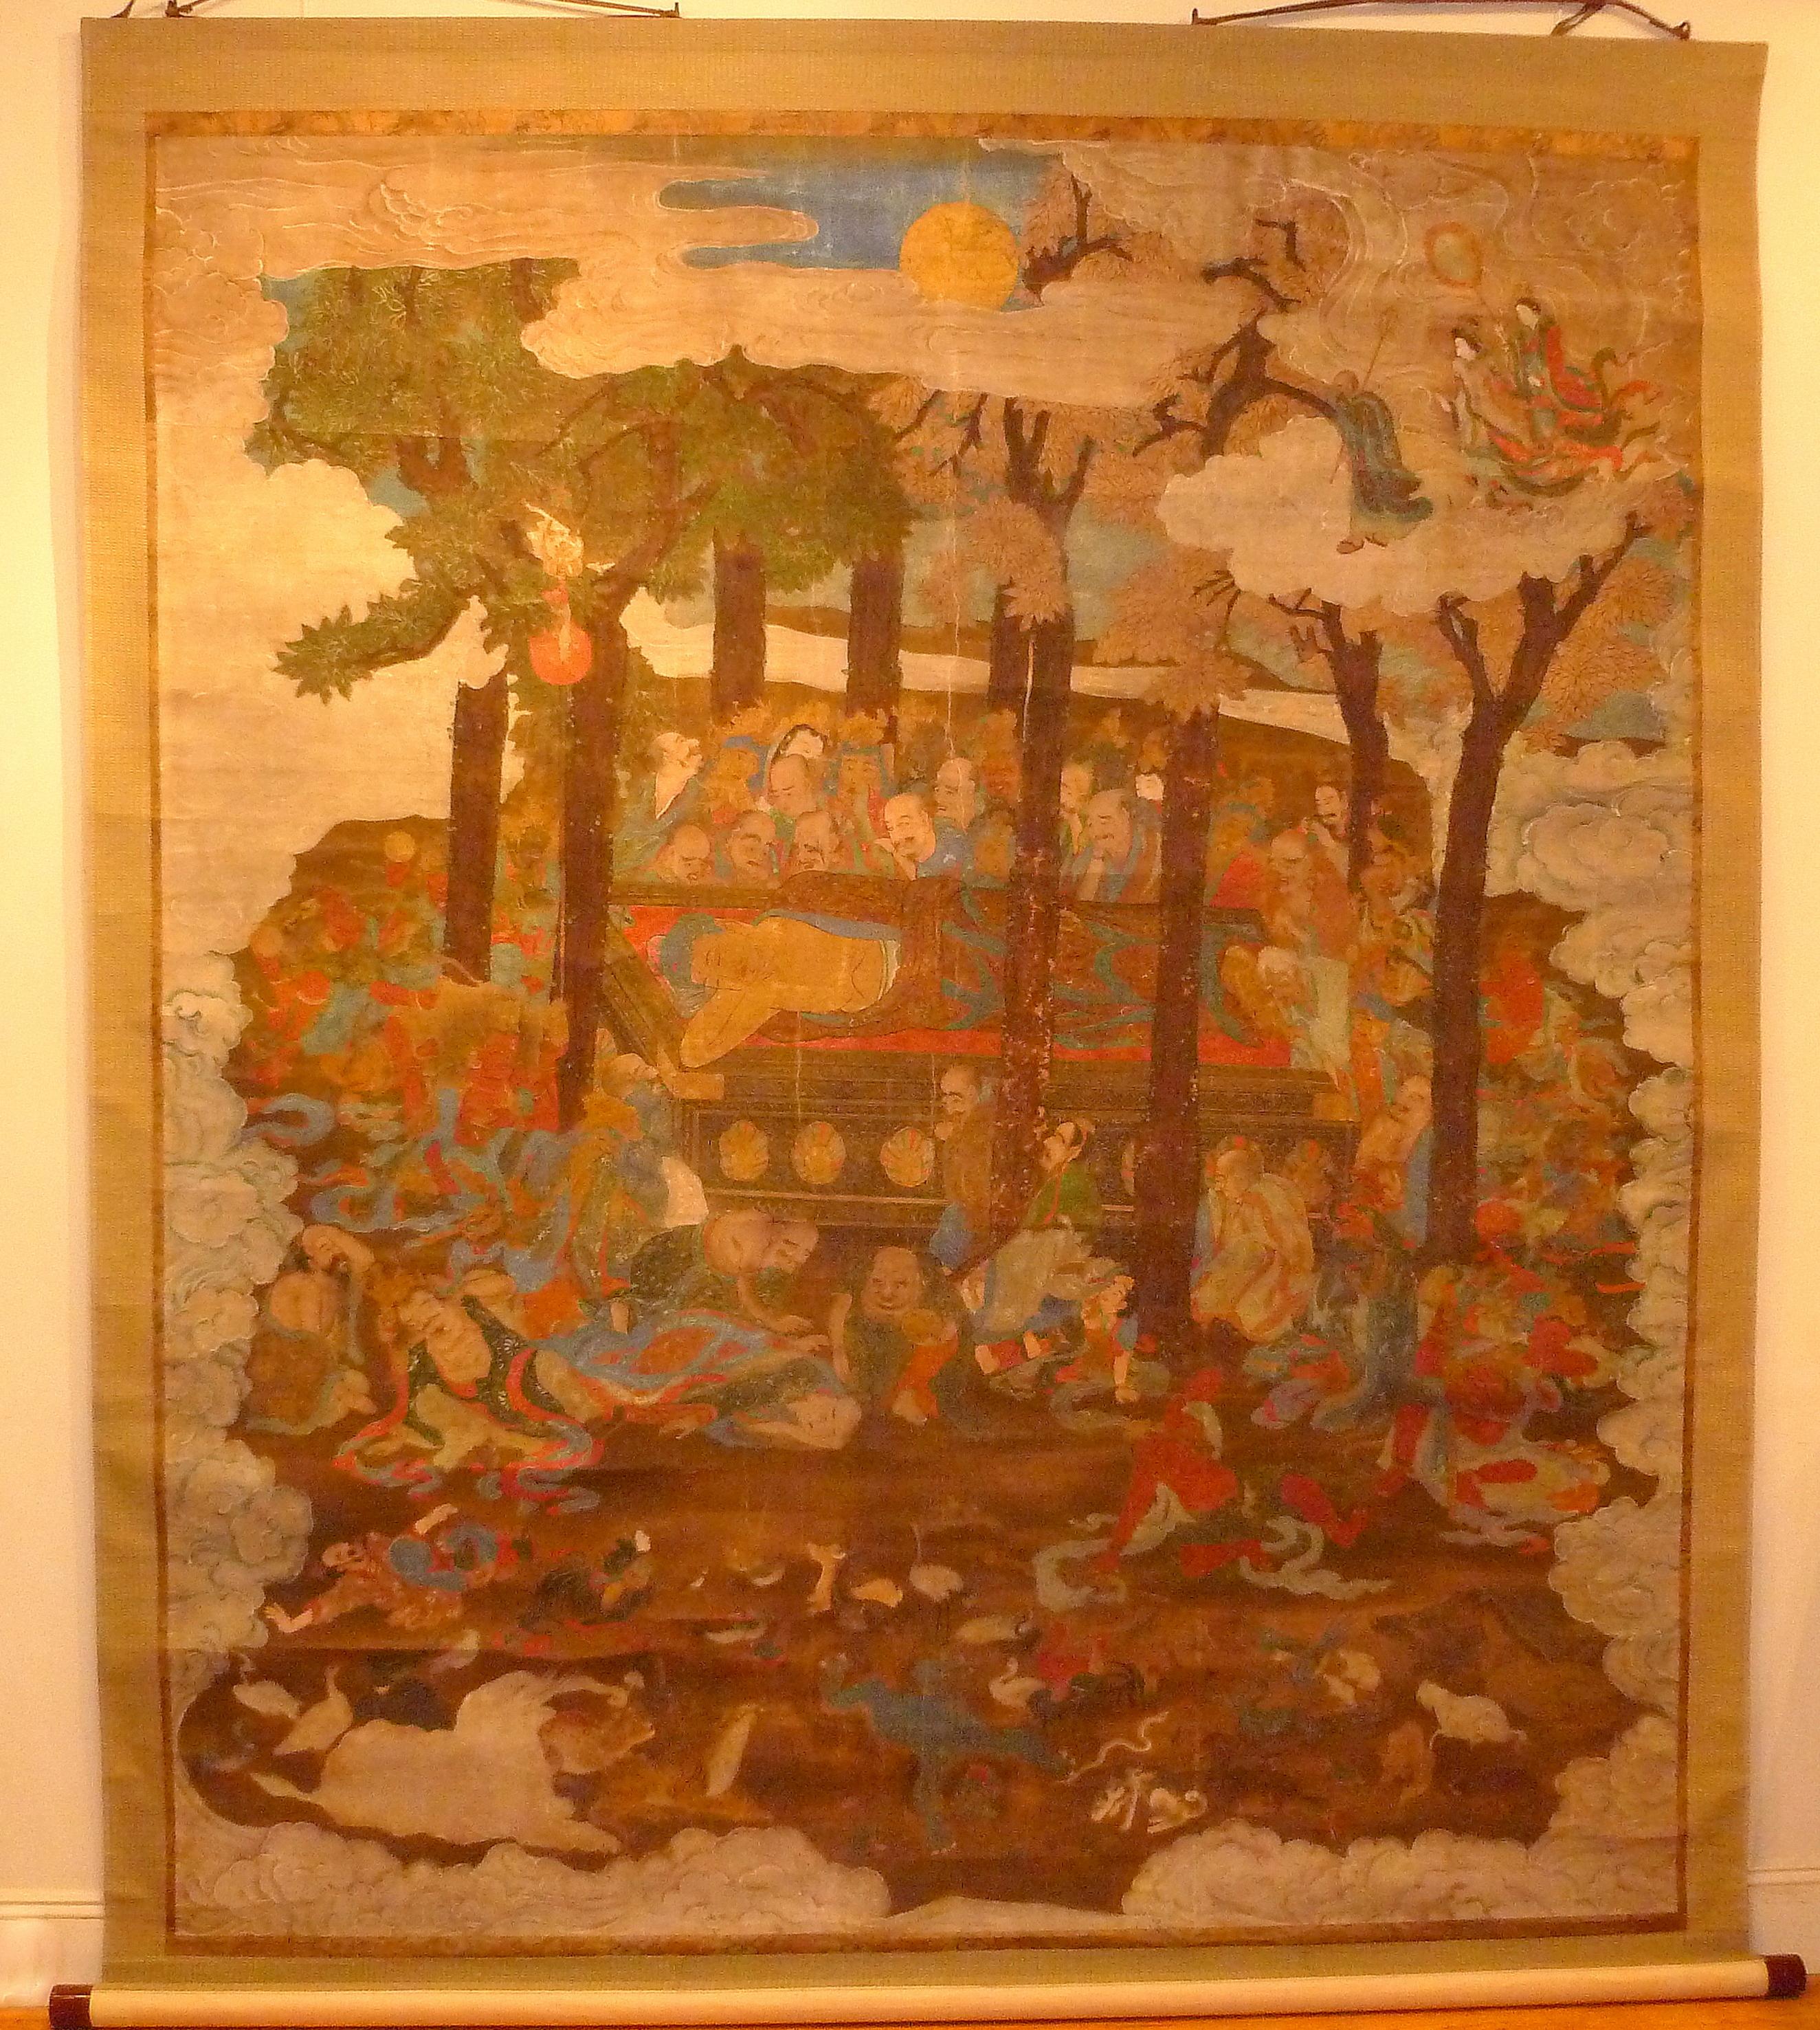 Monumental and massive Japanese Sakyamuni with disciples Buddhist painting. Very large massive Japanese Buddhist painting, painting on silk and mounted on brocade scroll, very rare large size. Wonderful detail with Sakyamuni and disciples with many